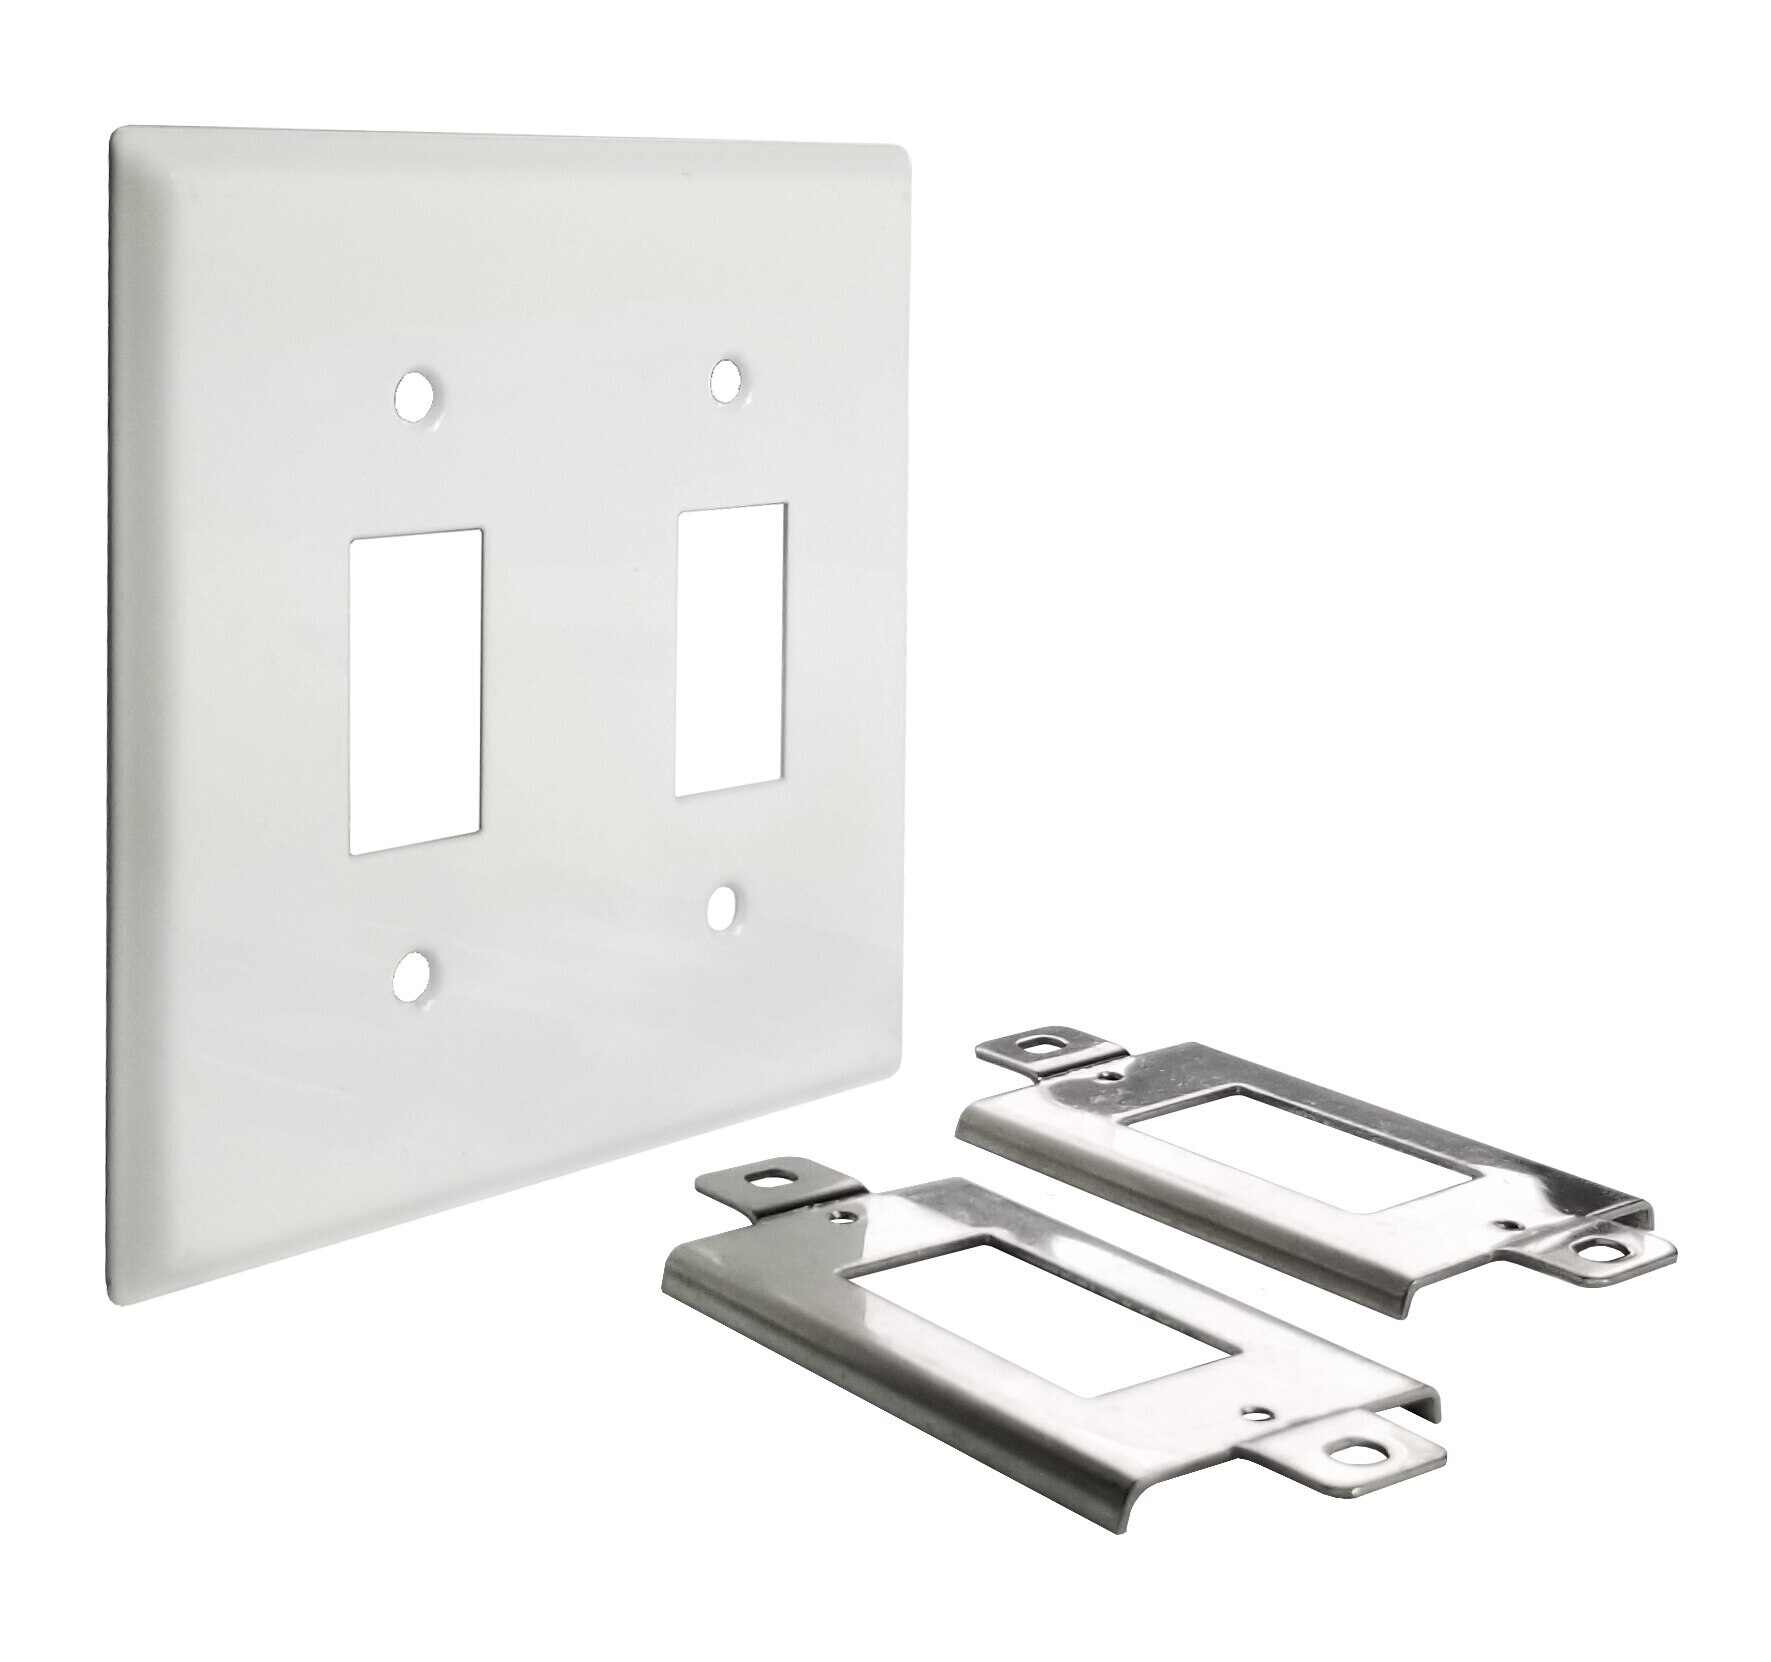 2 gang switch plate